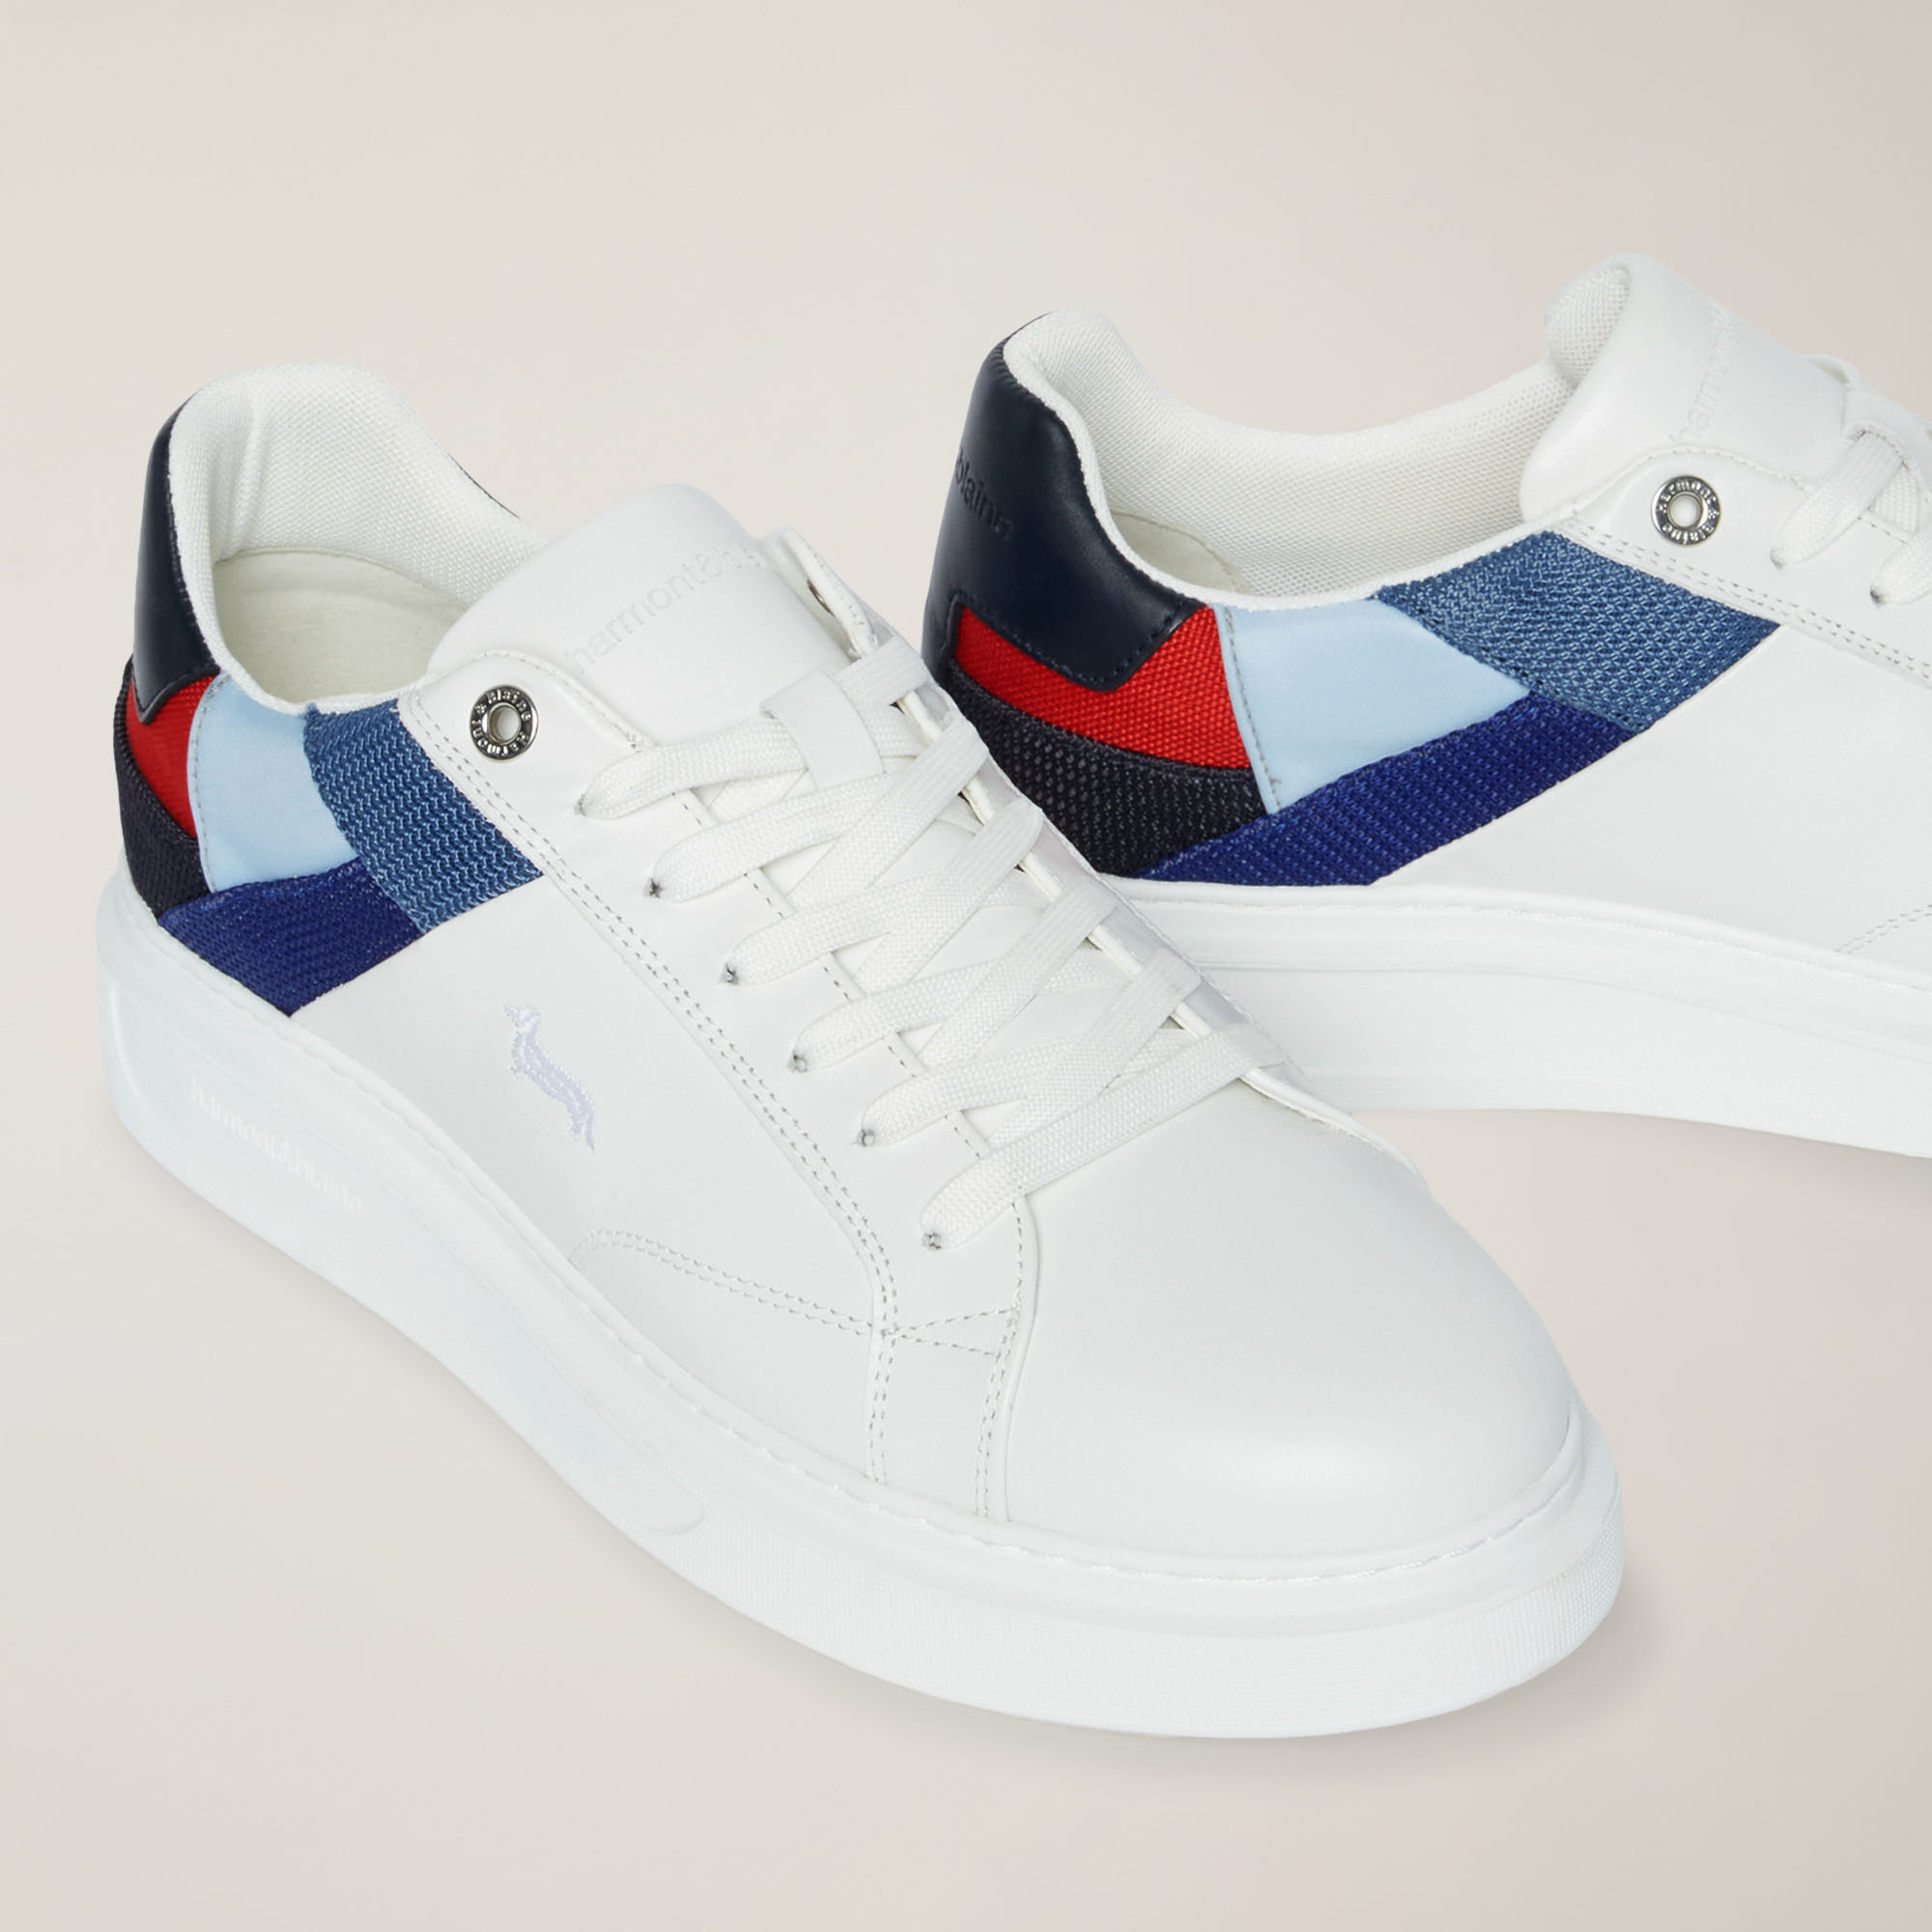 Sneaker with Patchwork Inserts, White/Multicolor, large image number 3